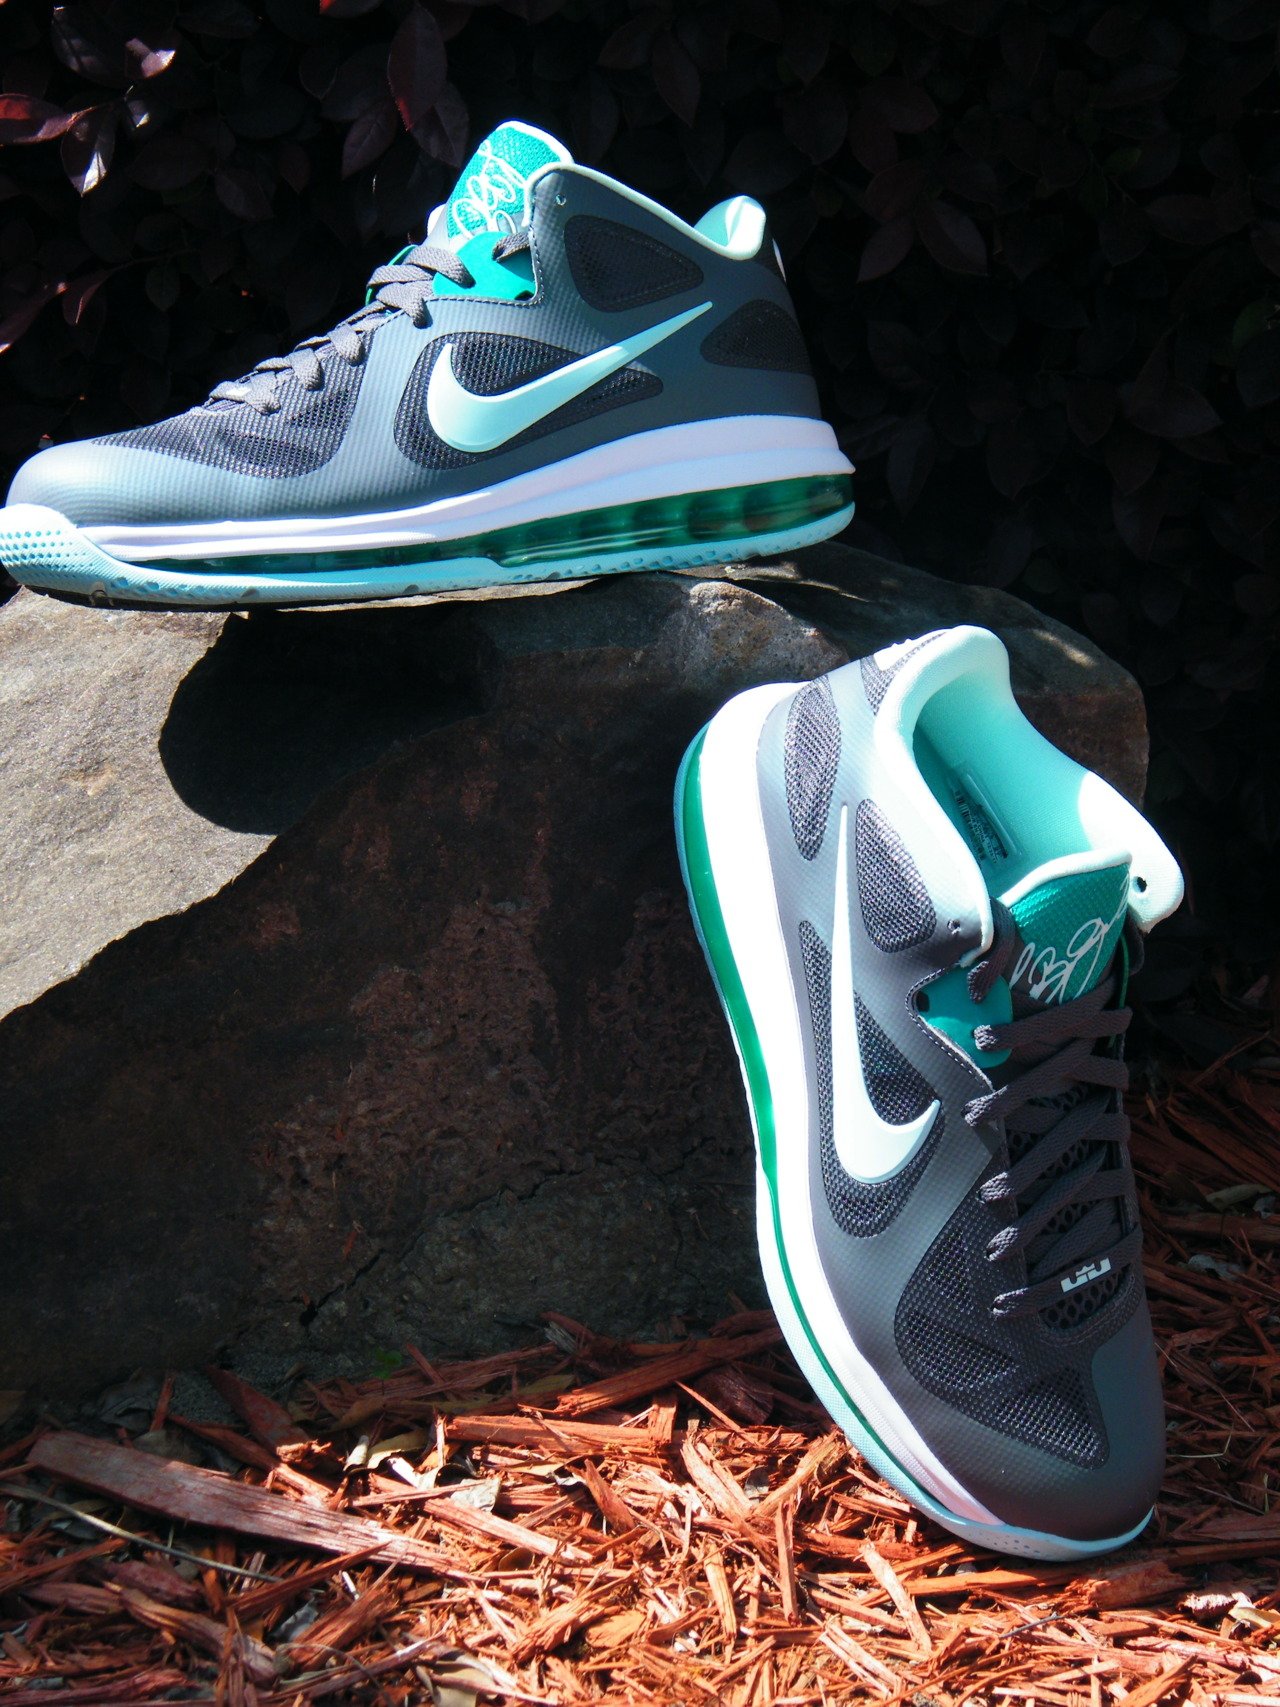 Nike LeBron 9 Low 'Easter' Arriving at Retailers